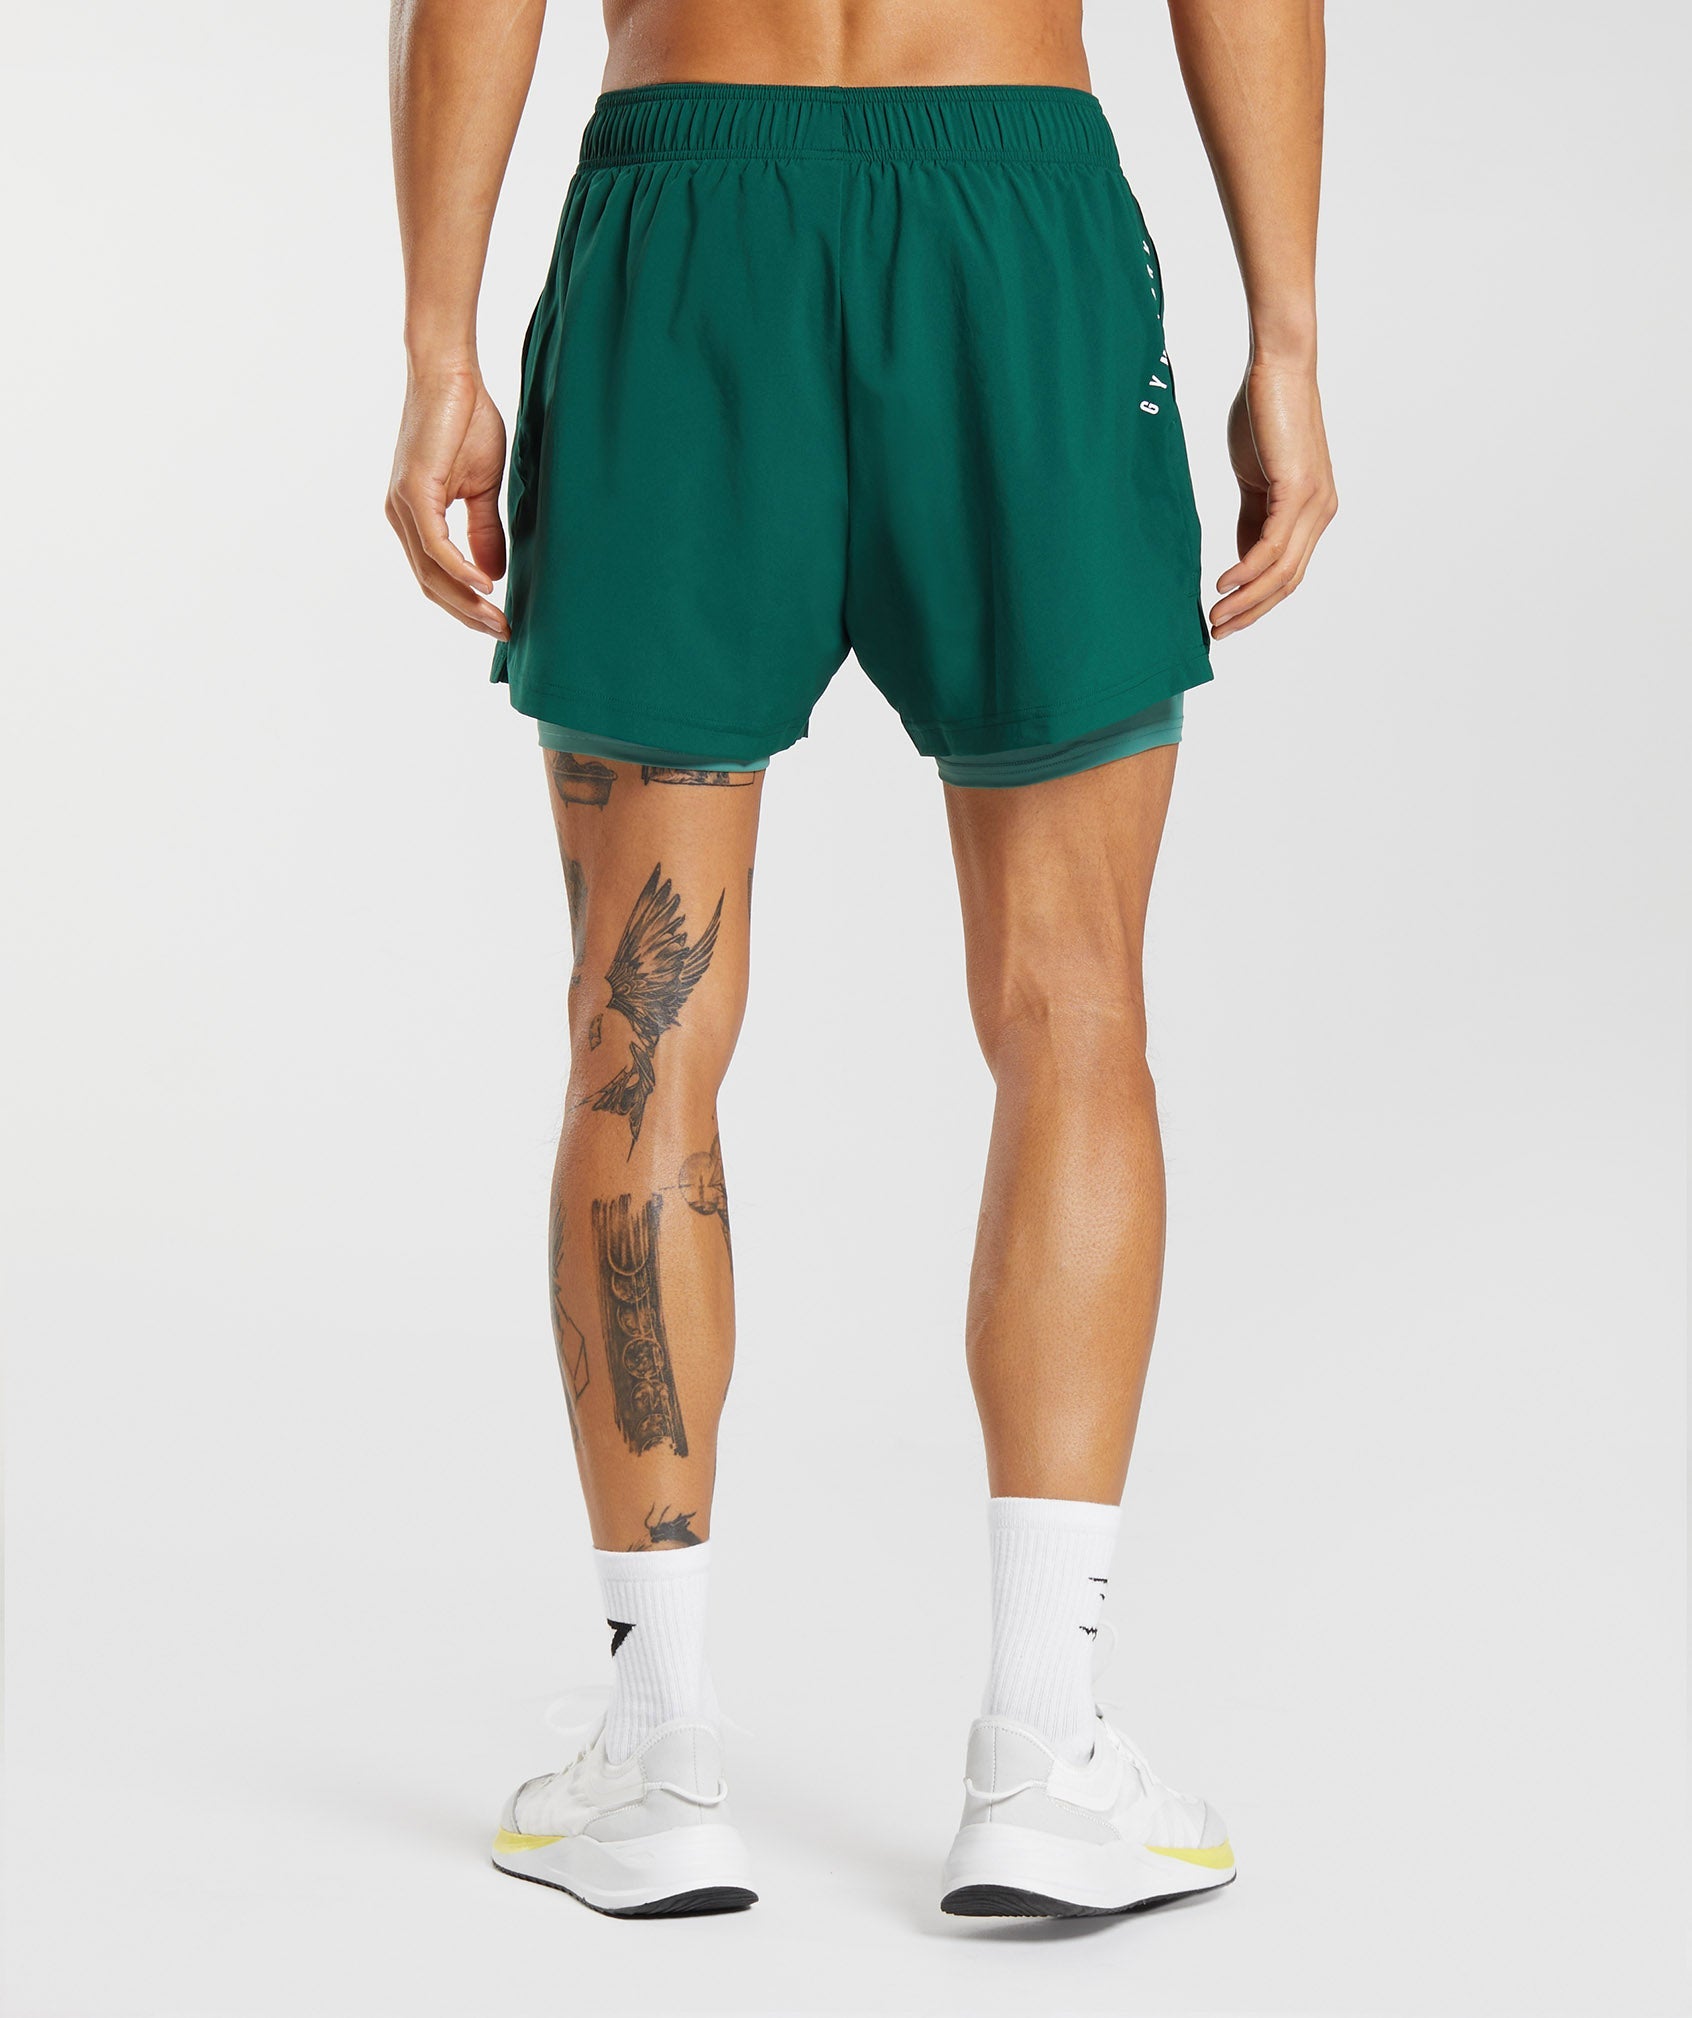 Sport 5" 2 In 1 Shorts in Woodland Green/Hoya Green - view 2